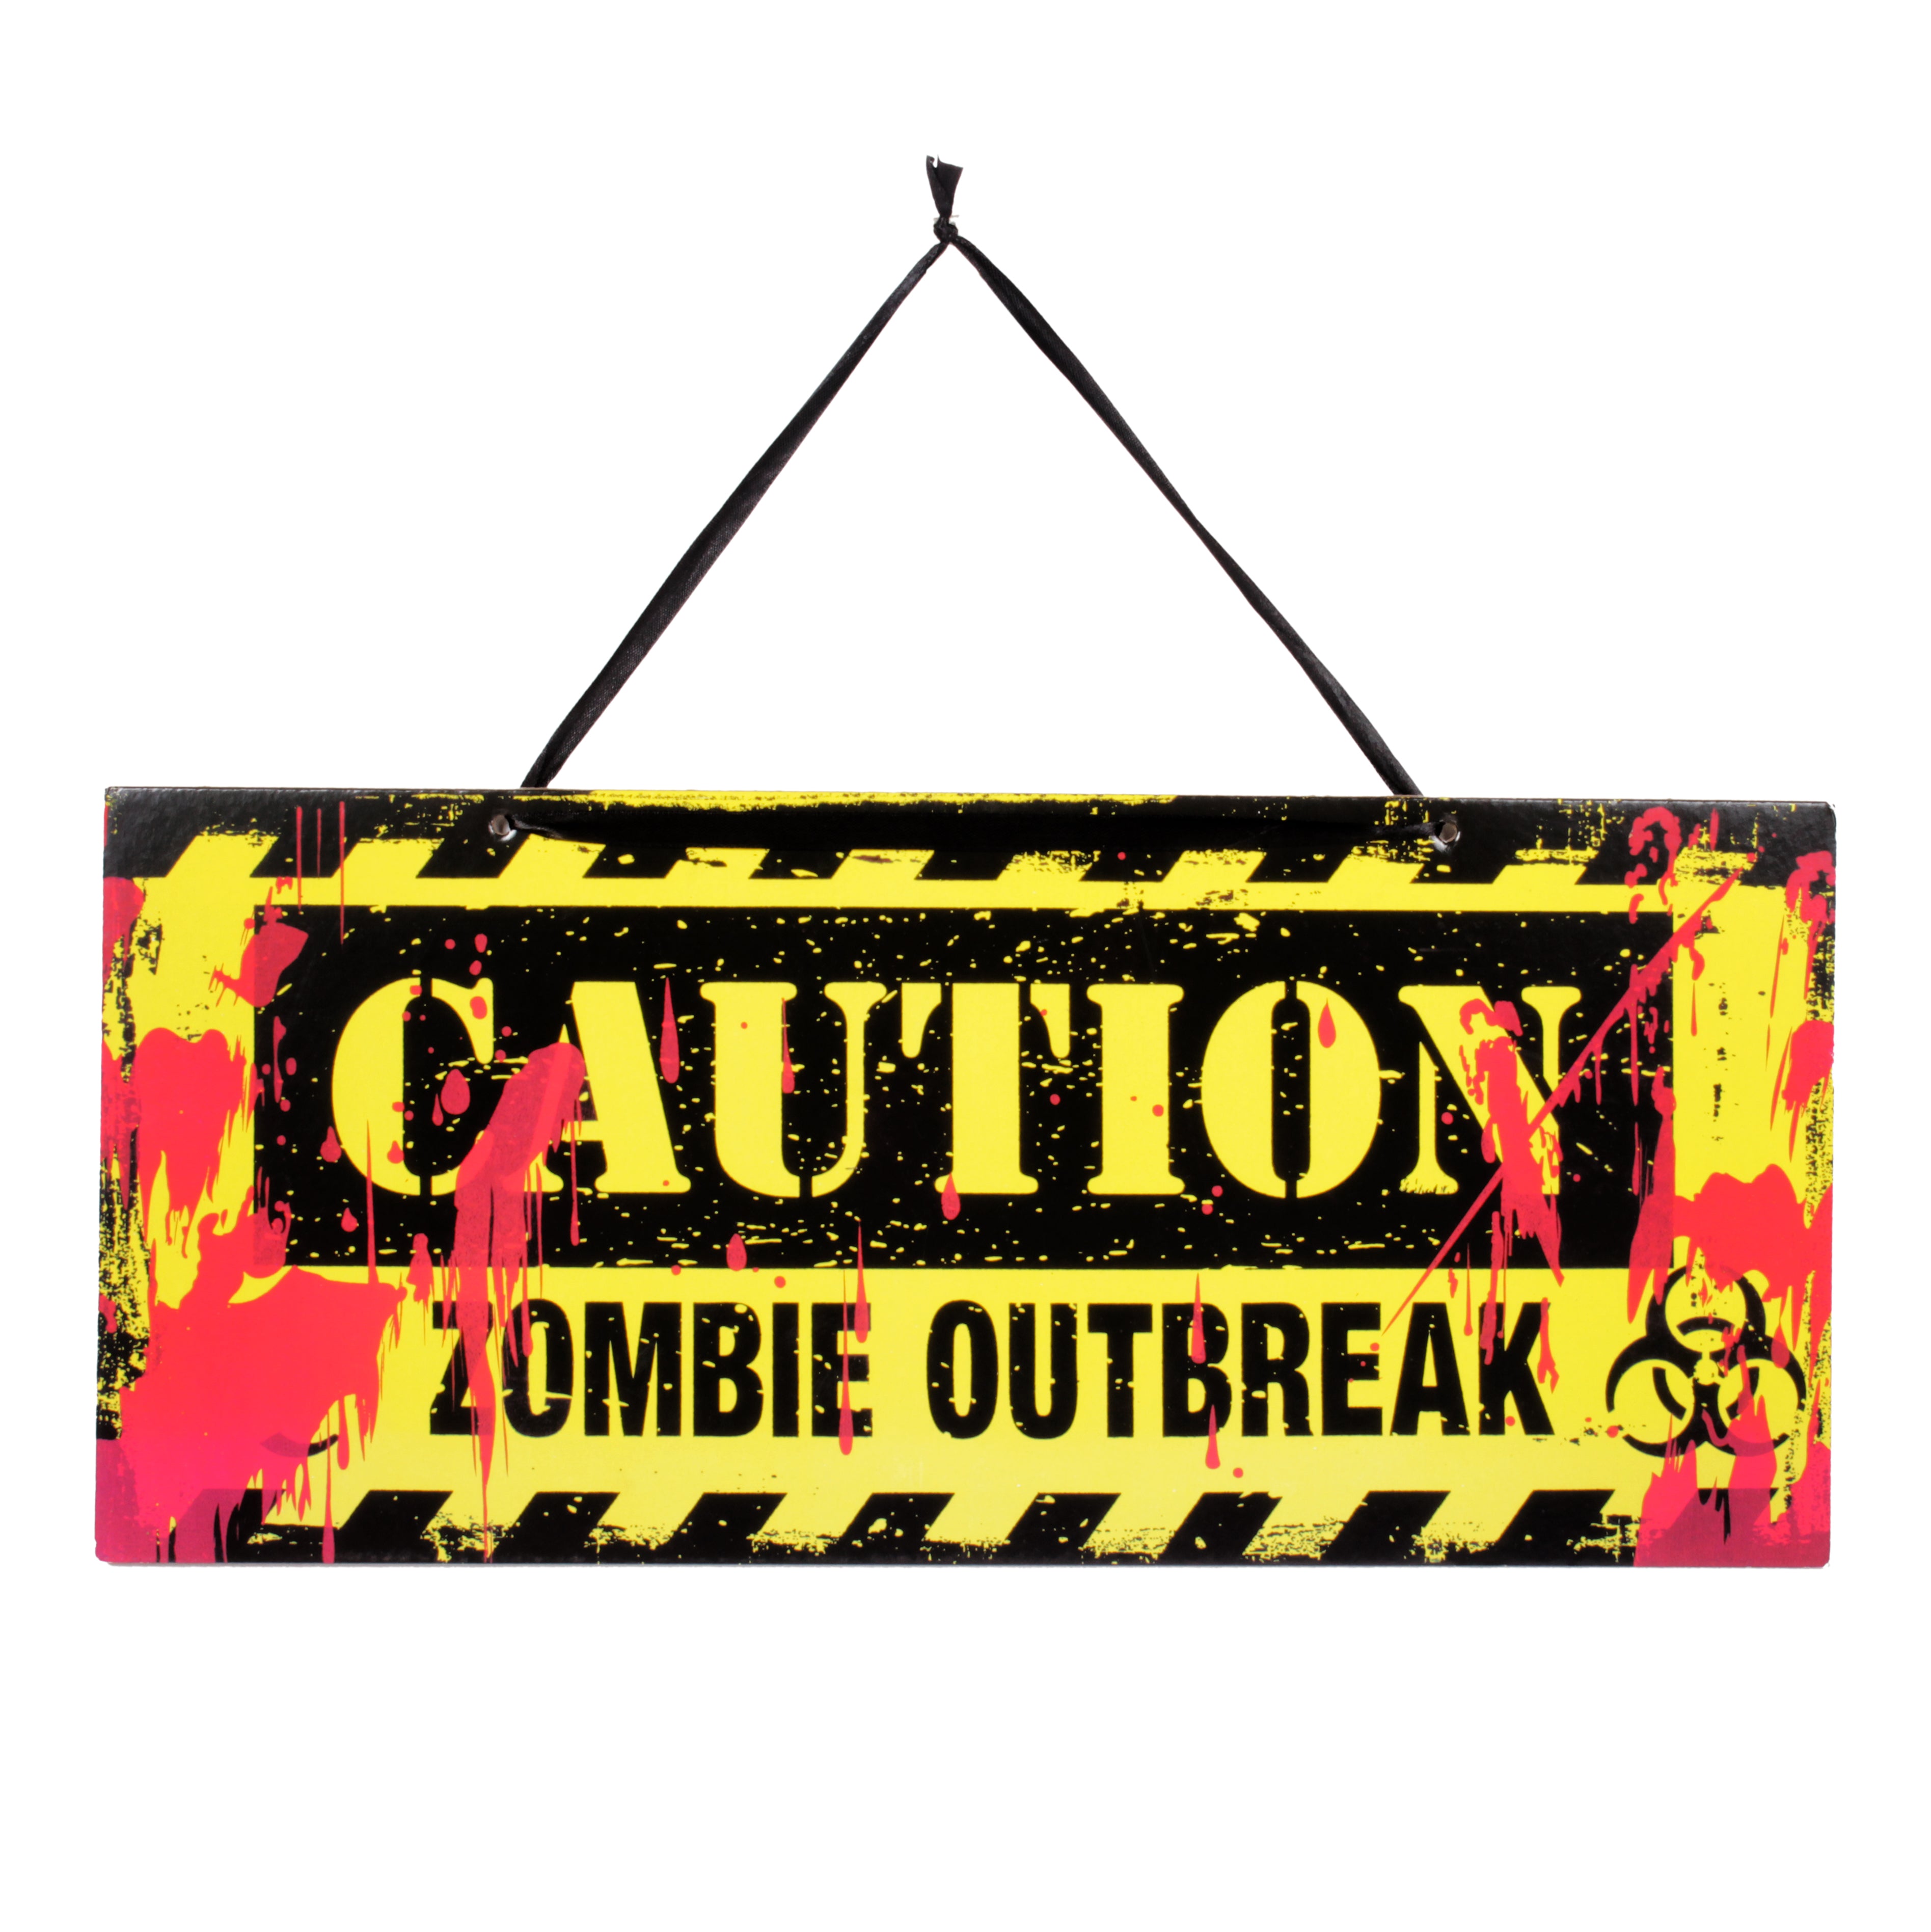 Warning Sign - Caution Zombie Outbreak Hanging Sign Board 45cm x 20cm